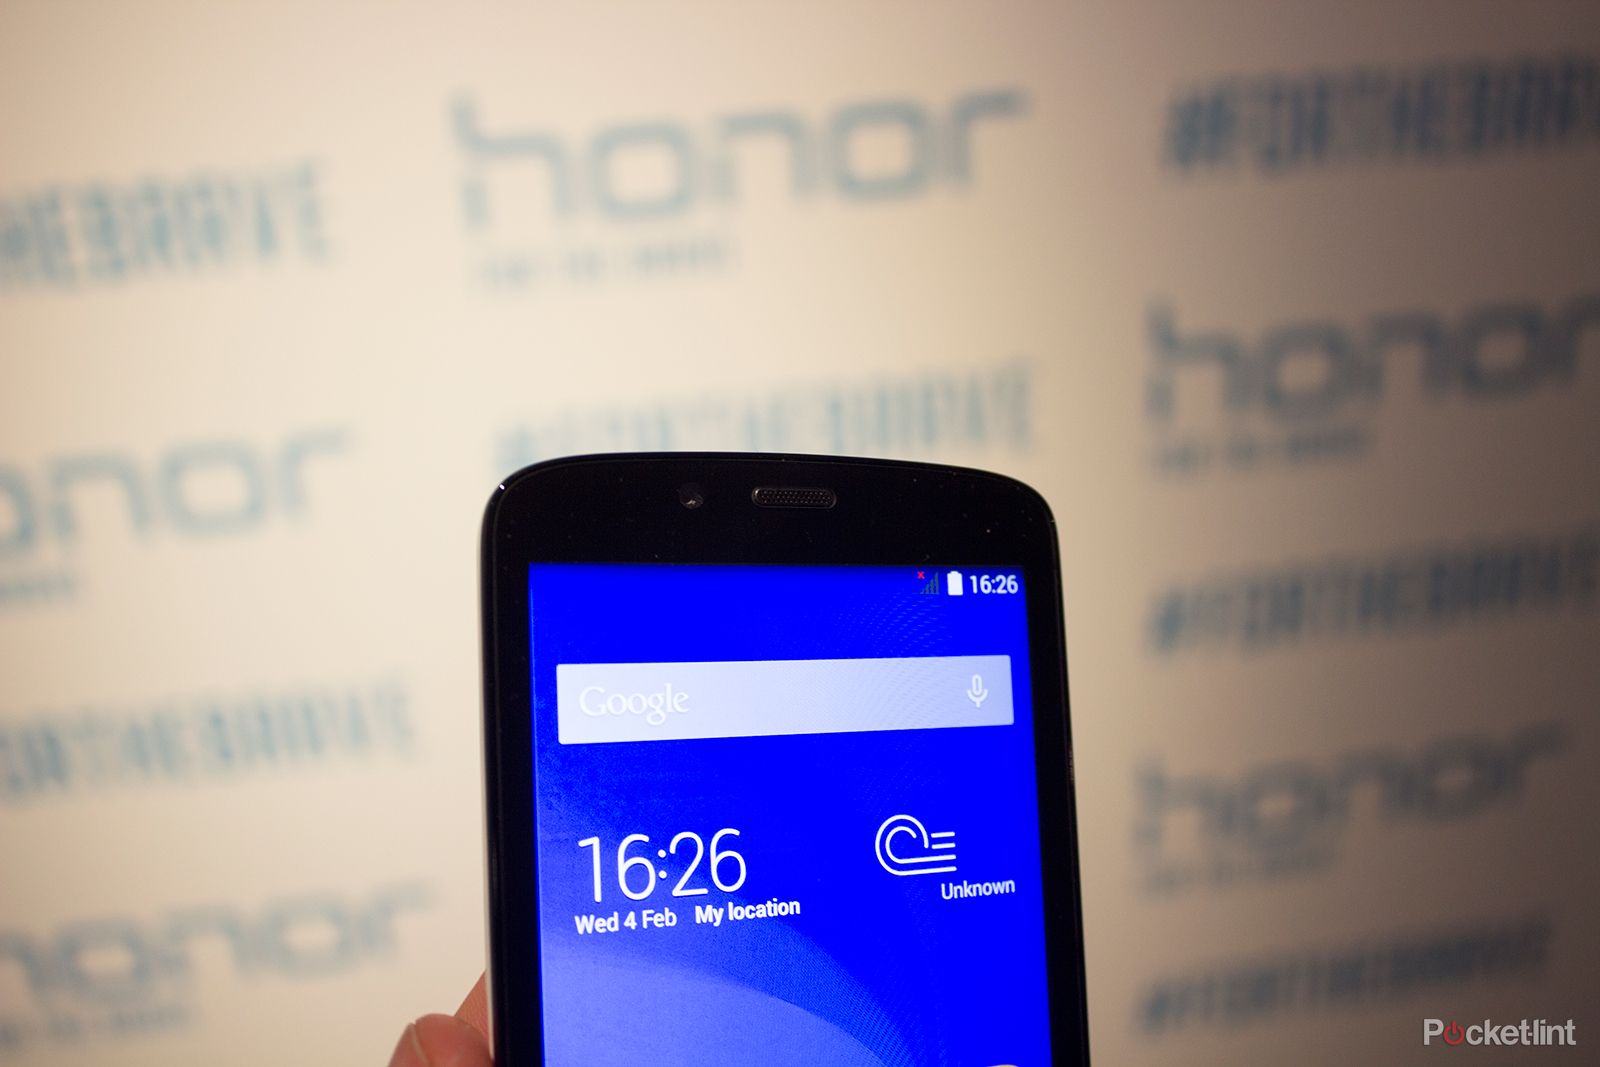 honor holly decent specs for under 100 hands on image 6